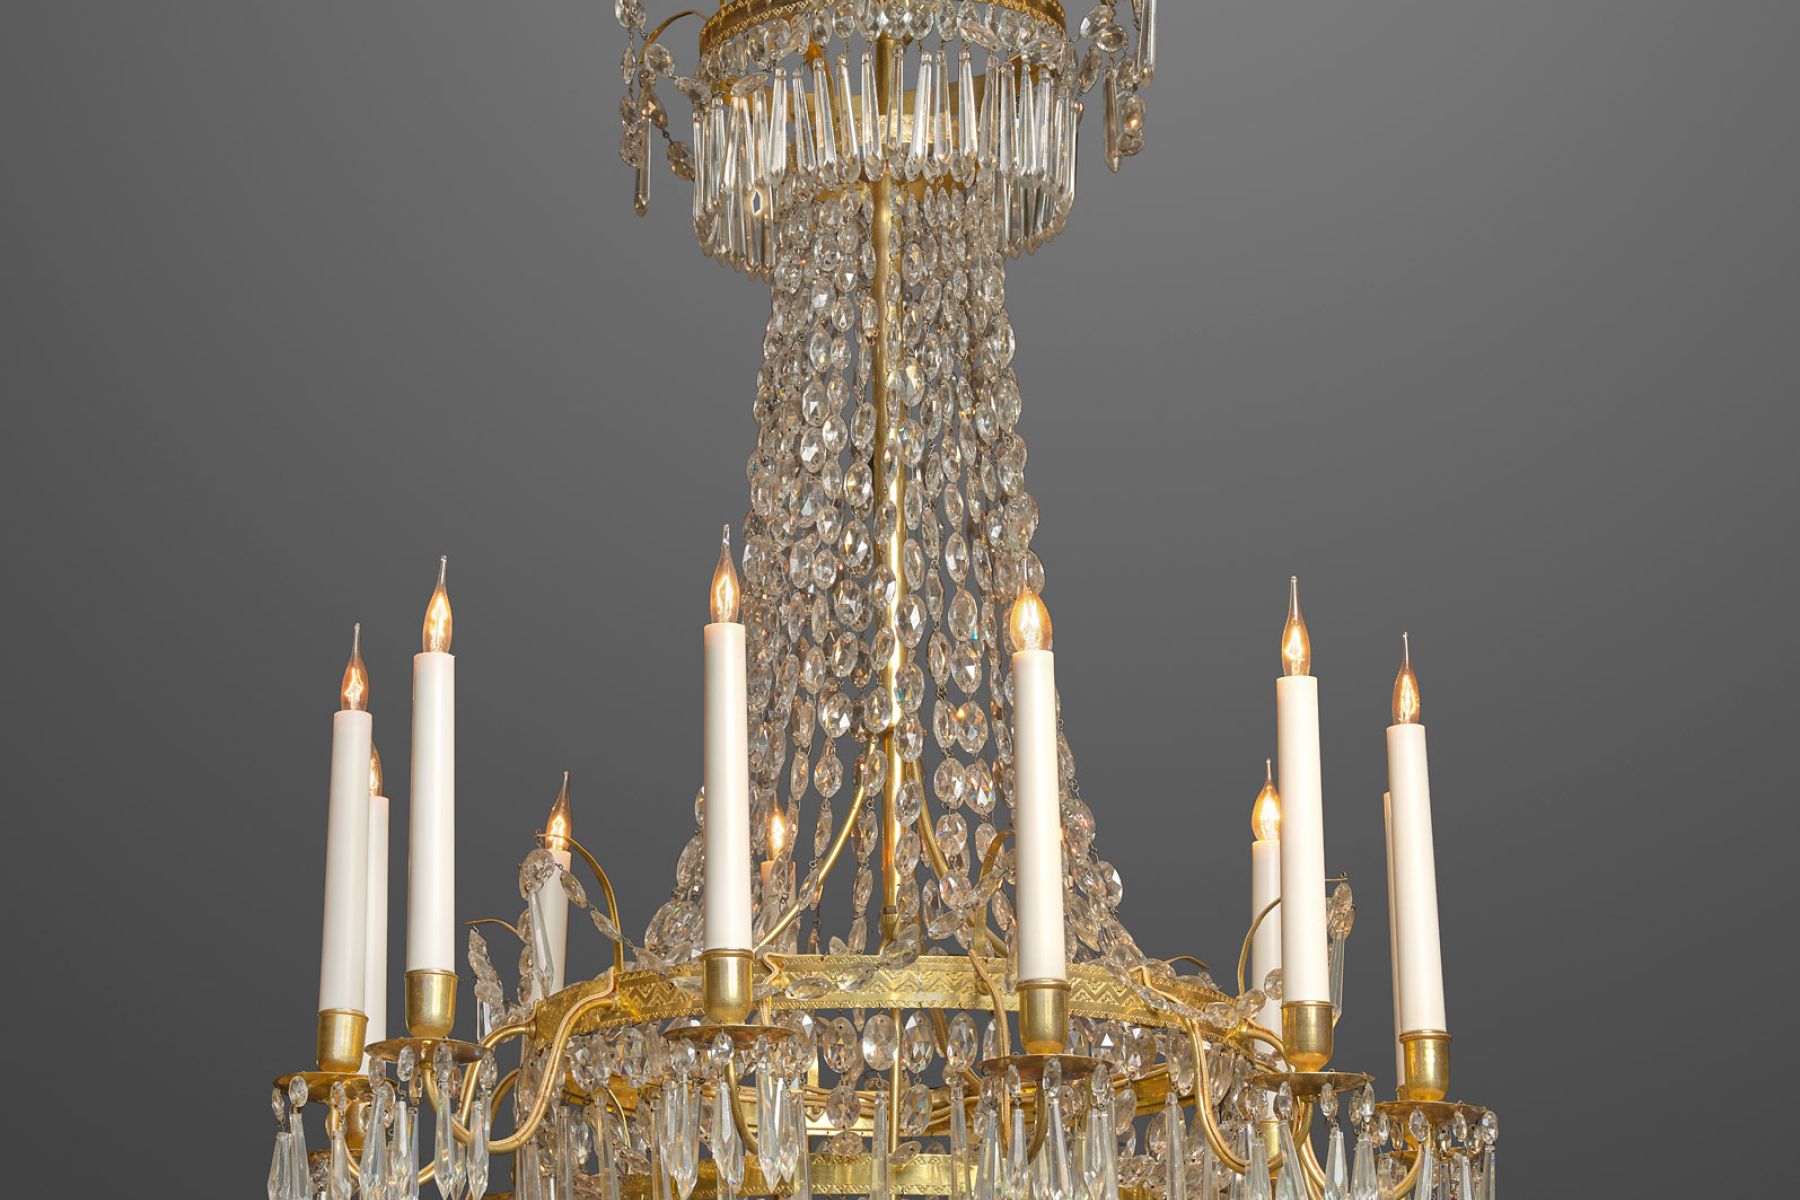 A late 18th/early 19th century chandelier